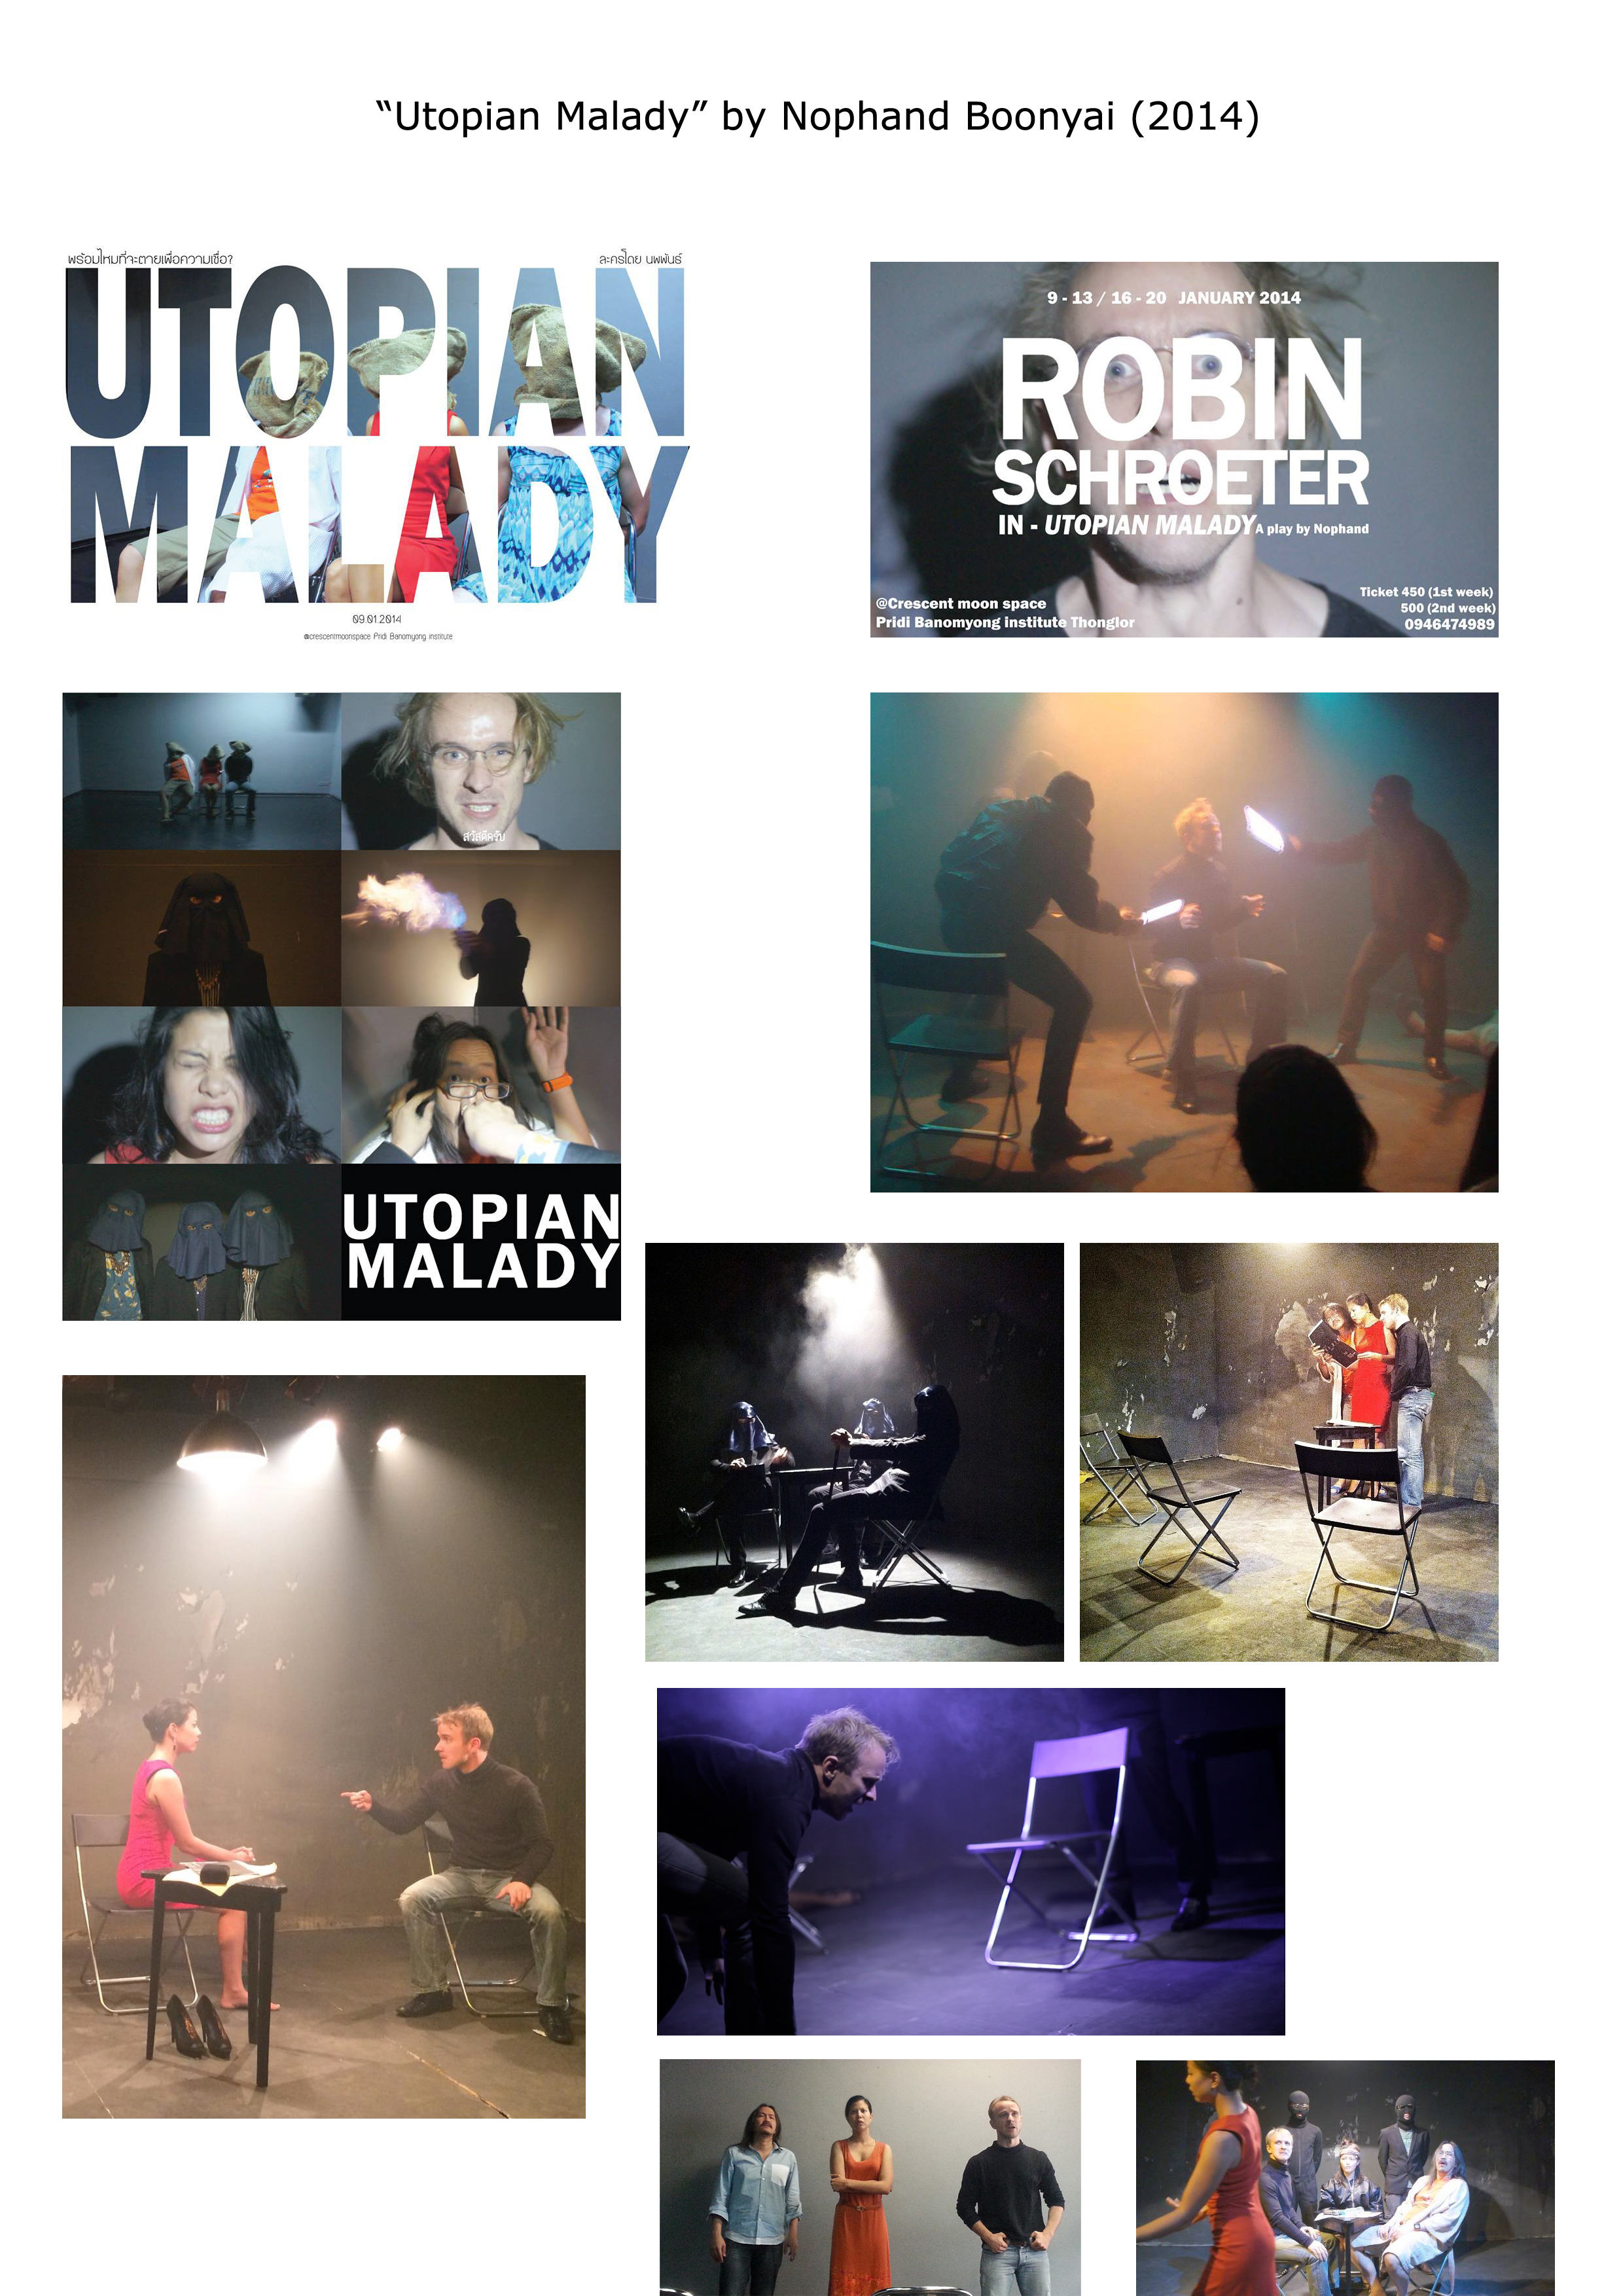 Picture Gallery of Utopian Malady